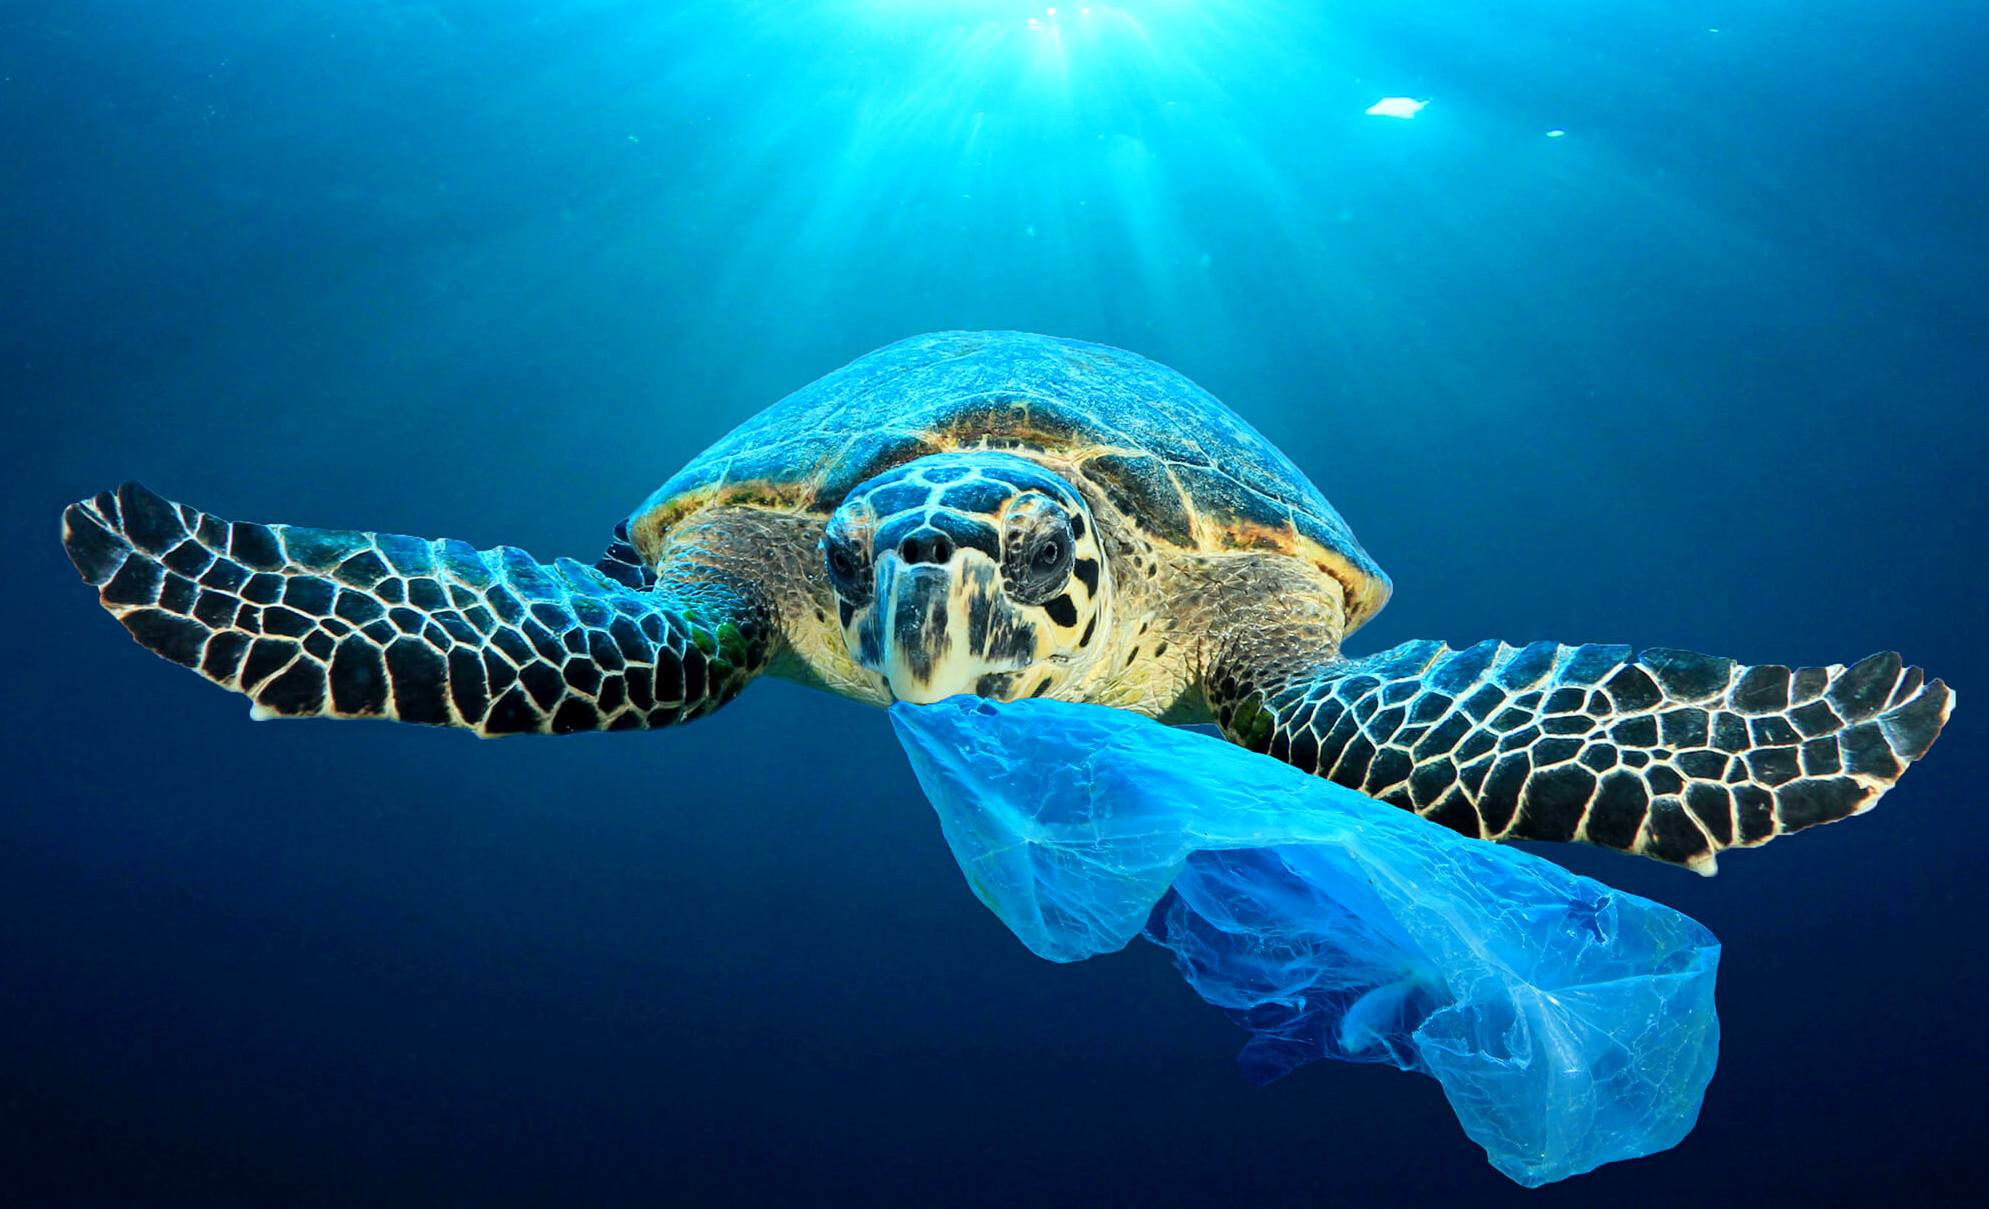 Turtle with a single use plastic bag, that resembles squid